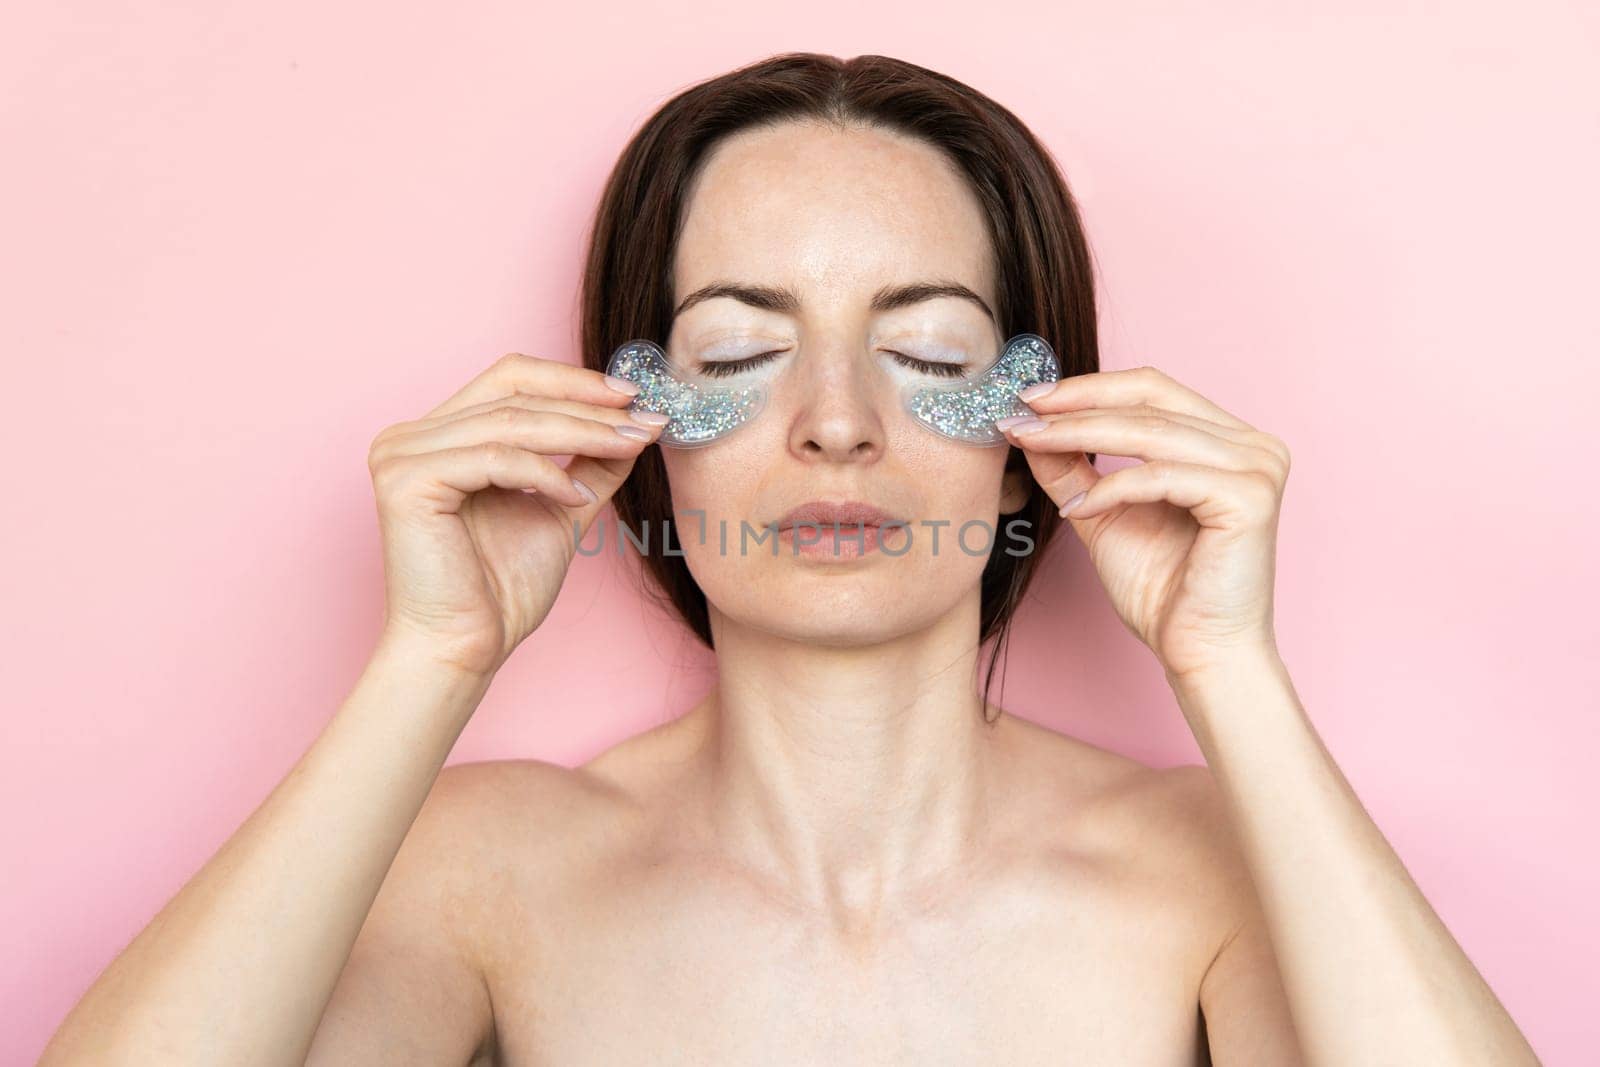 Pleased brunet woman closed eyes undergoes beauty procedures apply hydrogel patches under eyes to remove puffiness and wrinkles isolated over pink background. Skin care beauty treatment at home. by Ri6ka